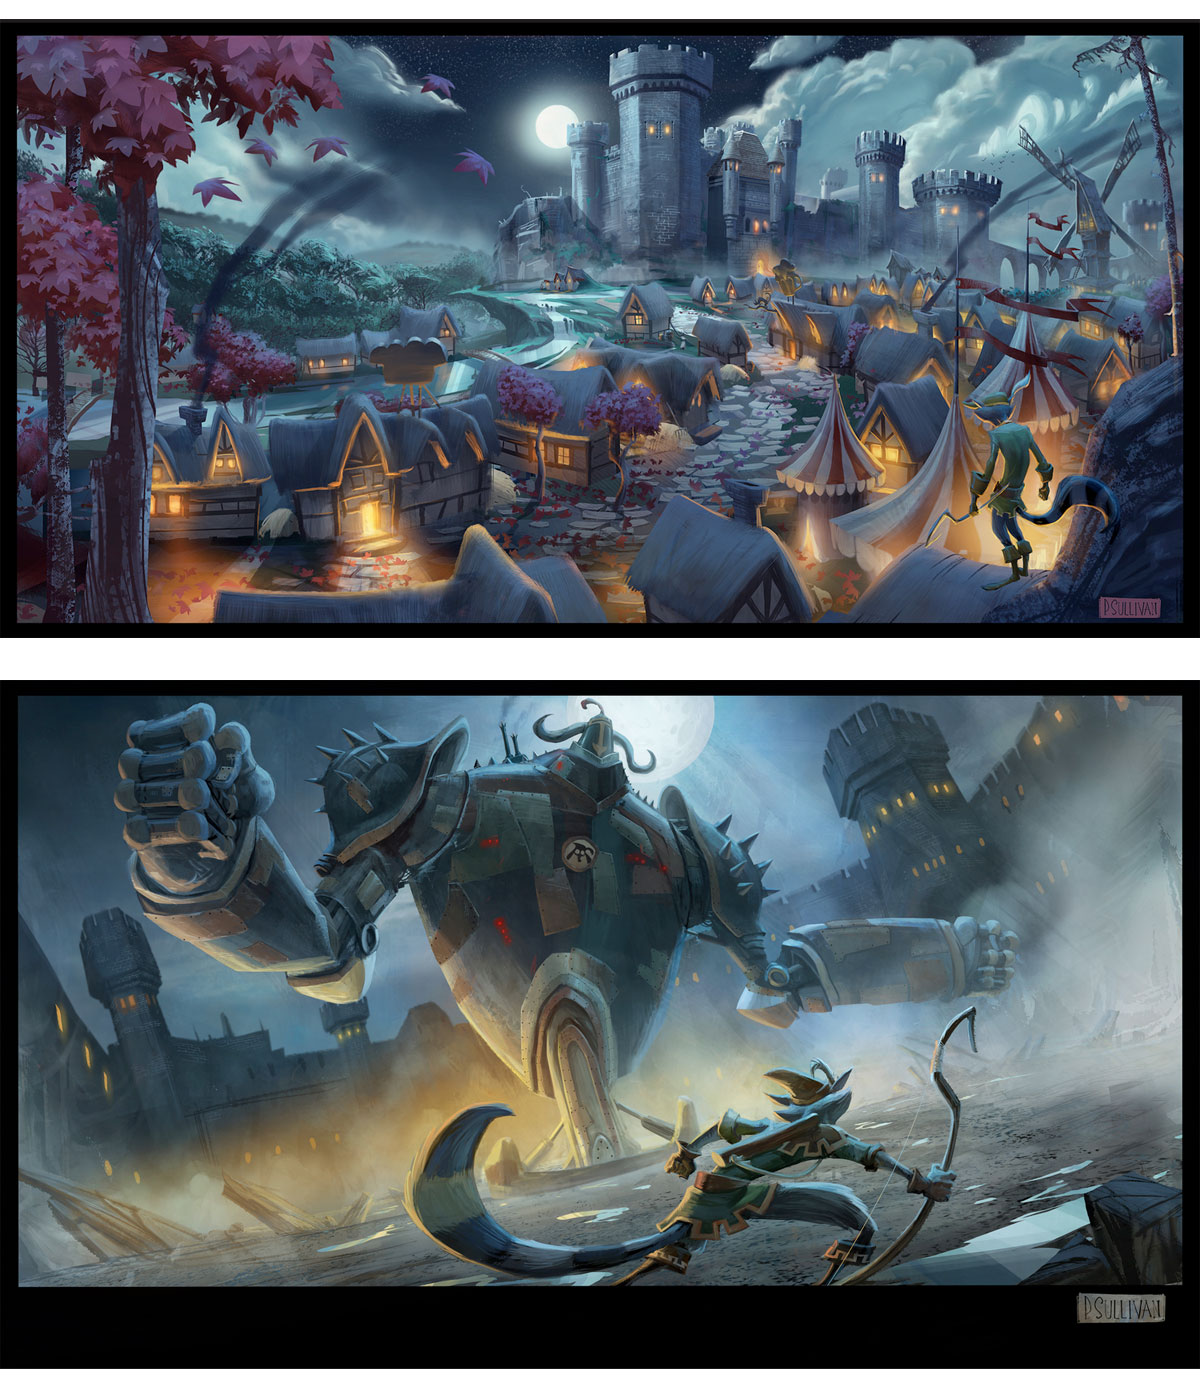 Artes do game Sly Cooper Thieves in Time, por Paul Sullivan - THECAB